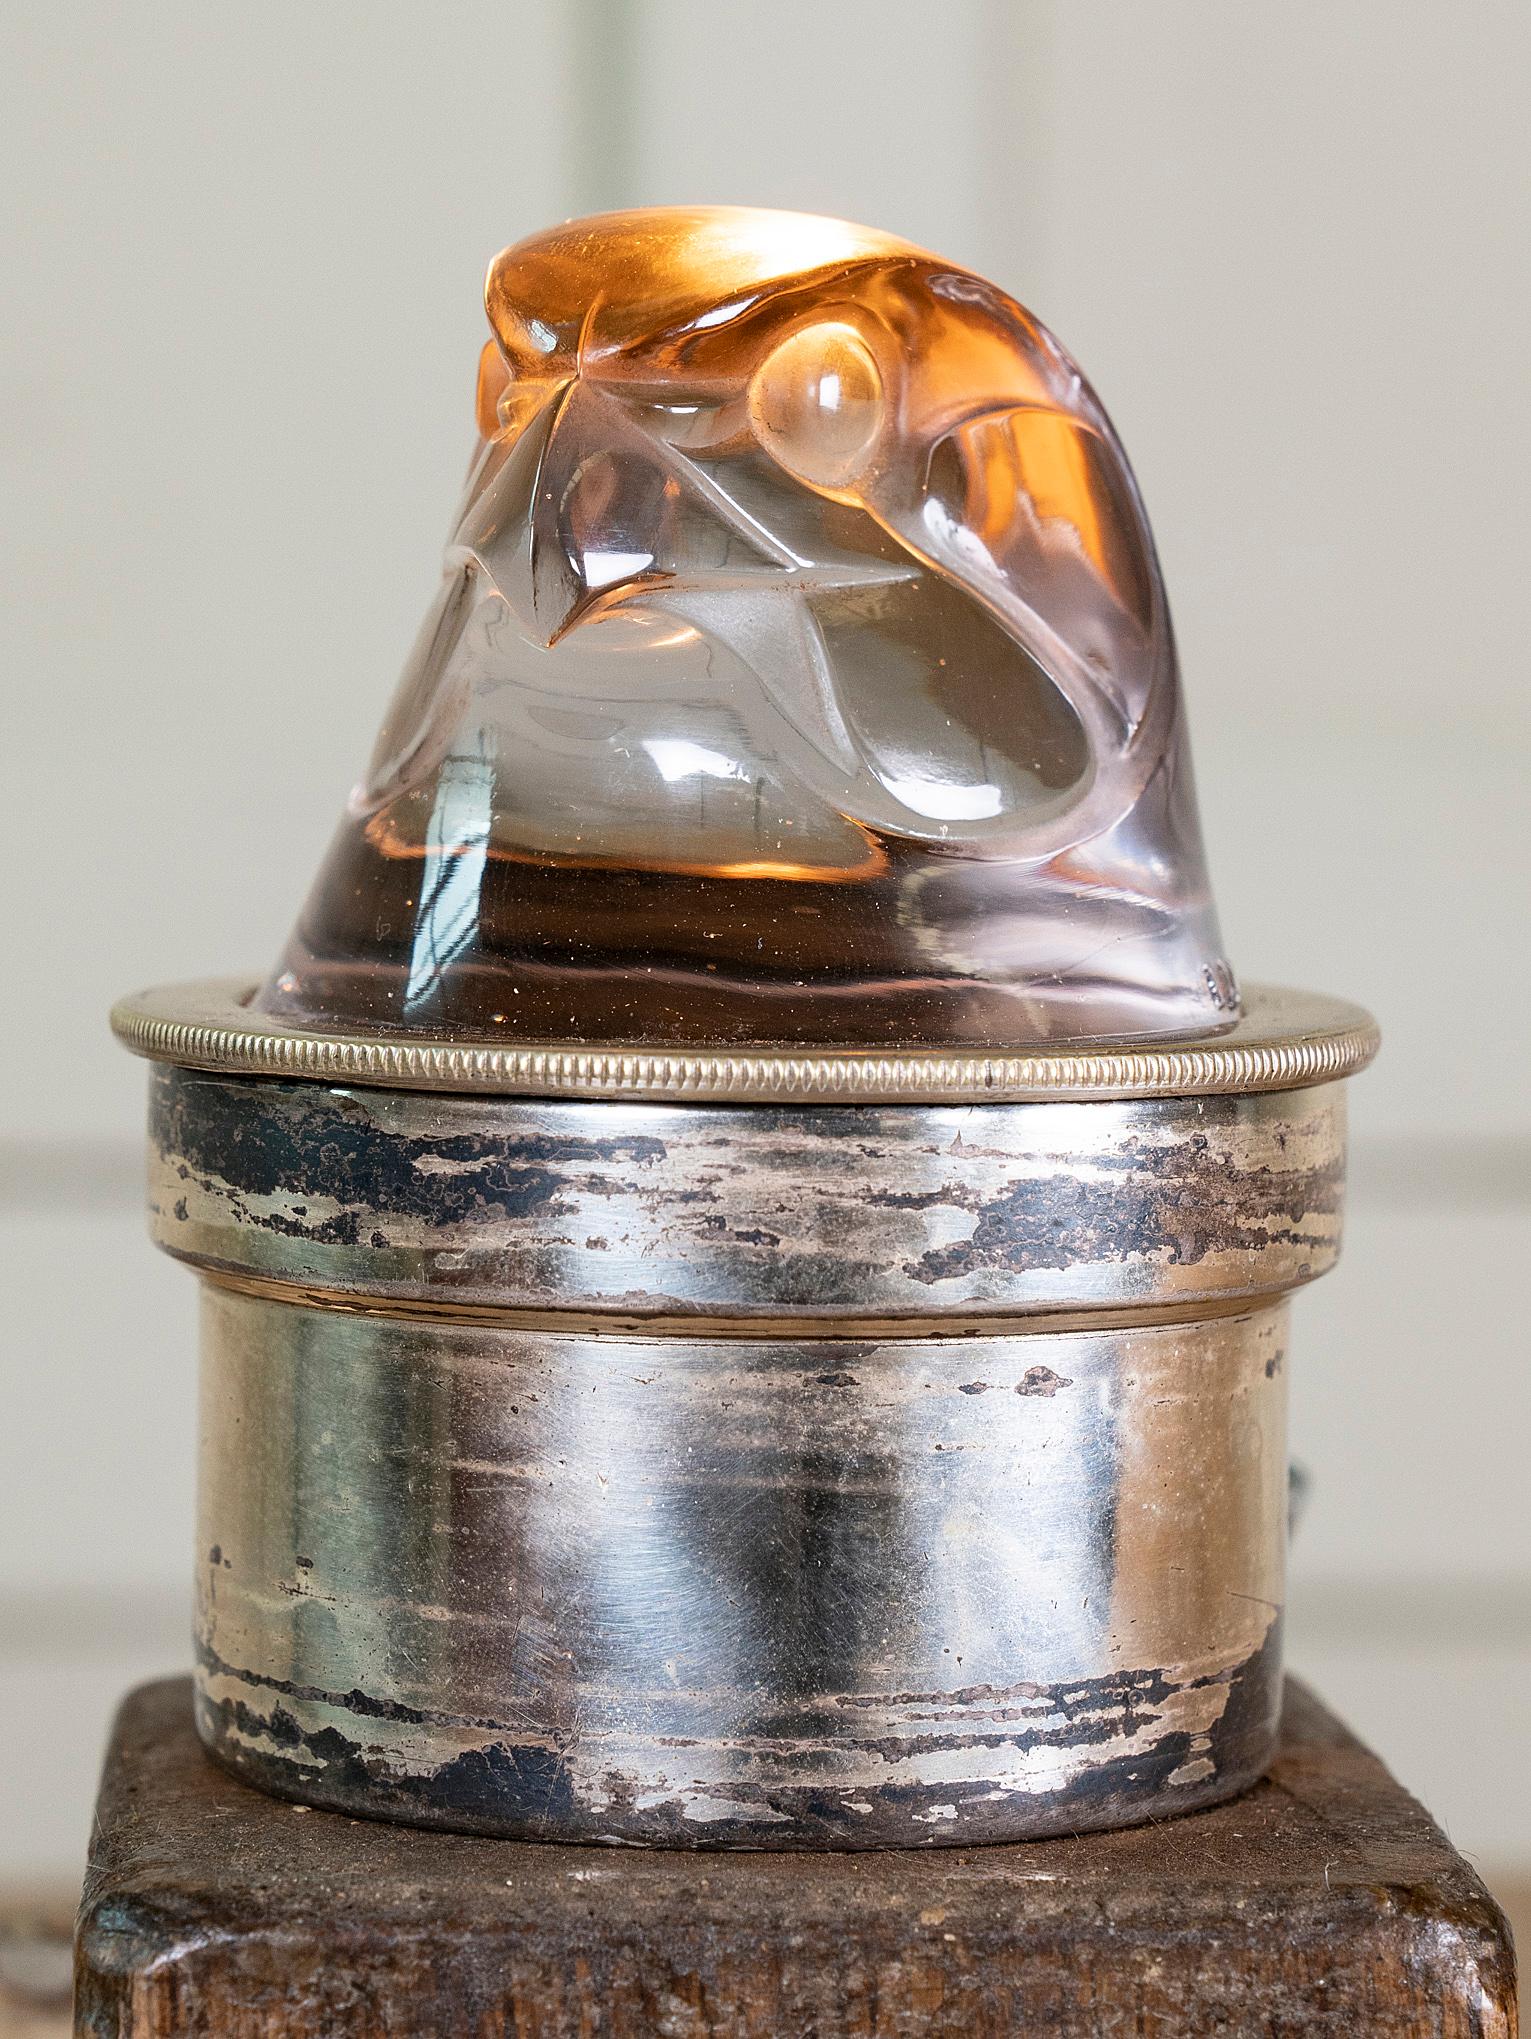 A illuminating glass Eagle head radiator cap car mascot.

Lalique commissioned Breves Gallery in Knightsbridge to mount his mascots and hood ornaments and then retail them to the British public.
The glass mascots were mounted in nickel plated